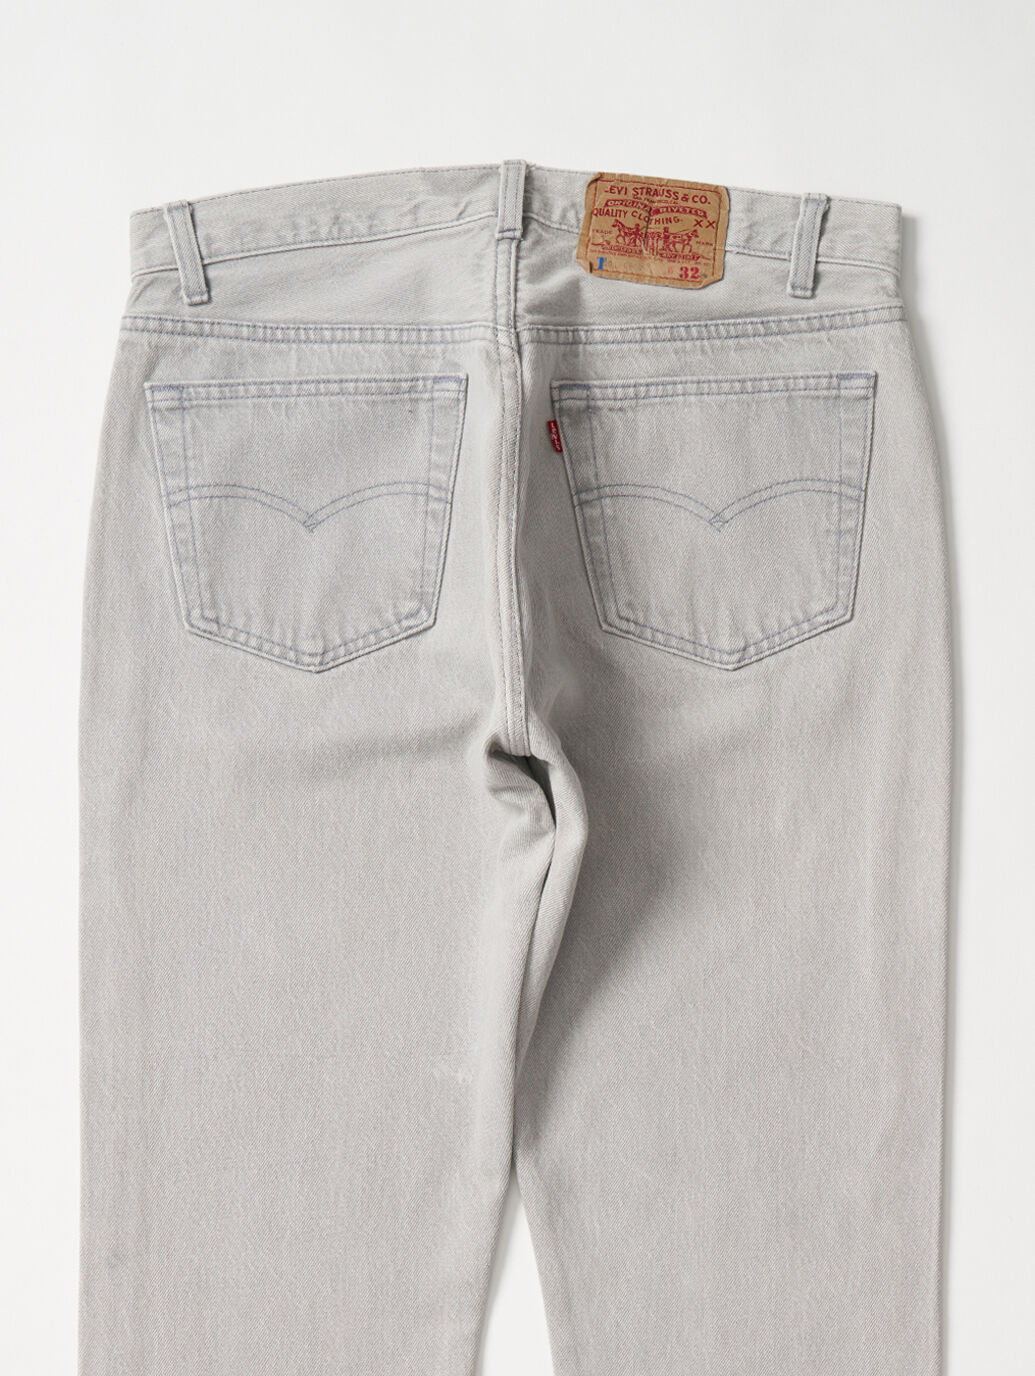 LEVI'S® AUTHORIZED VINTAGE MADE IN THE USA 501® TAPER｜リーバイス 